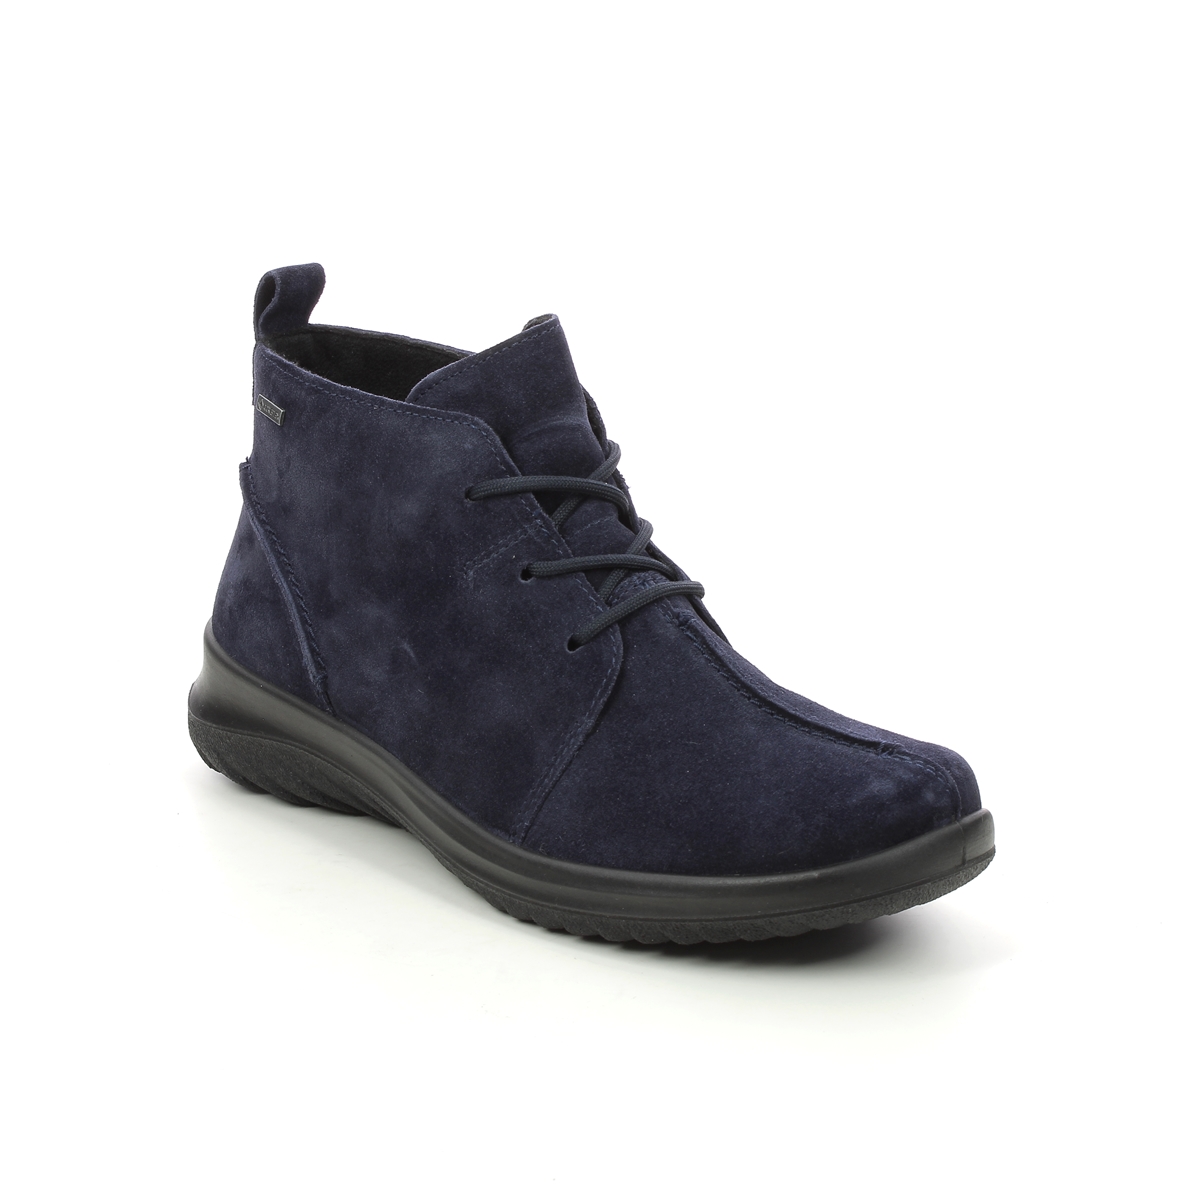 Legero Soft Lace Gtx Navy Suede Womens Lace Up Boots 2009569-8300 In Size 5 In Plain Navy Suede